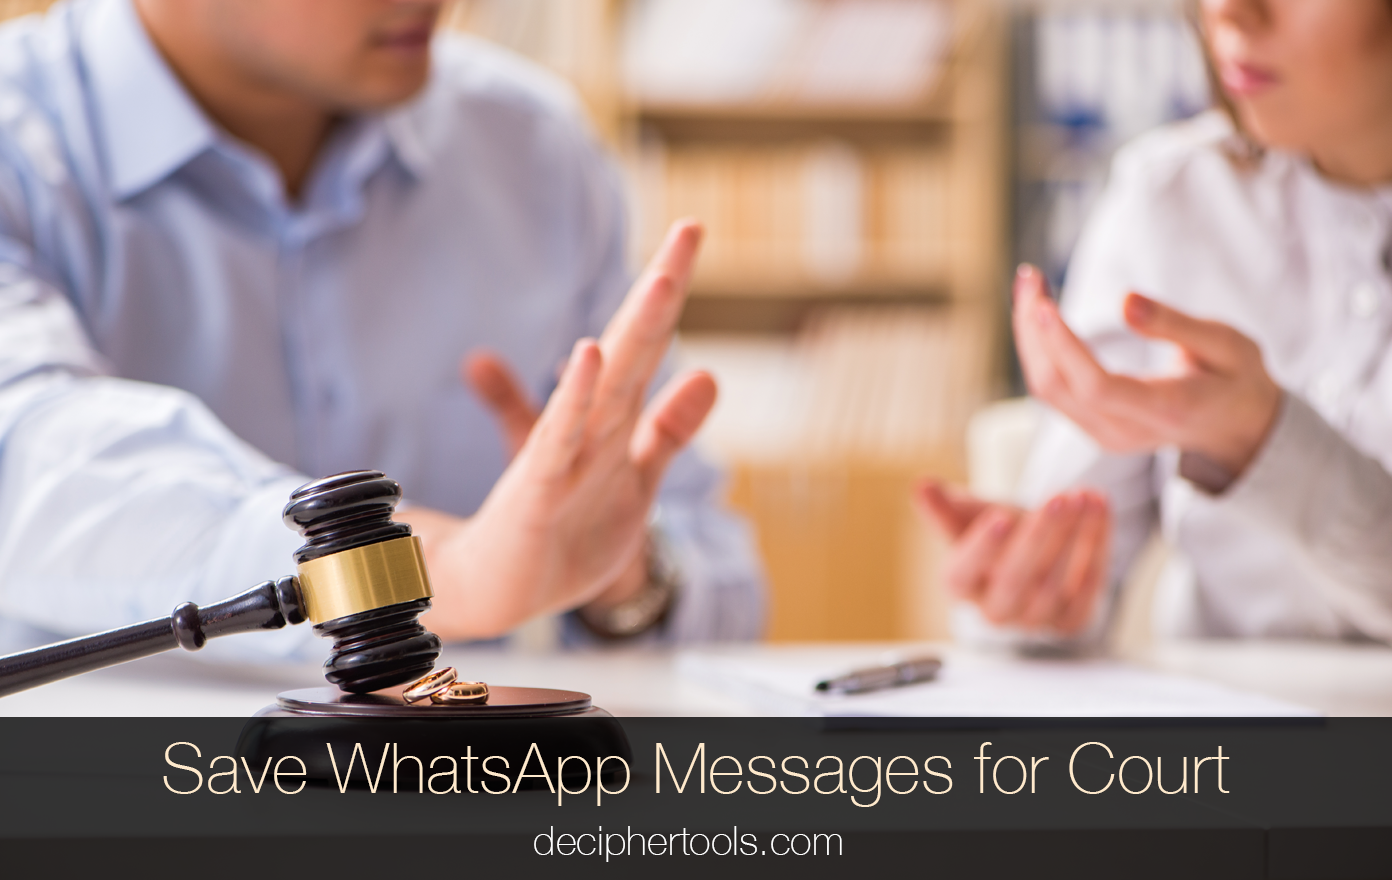 How to Save WhatsApp Messages for Court